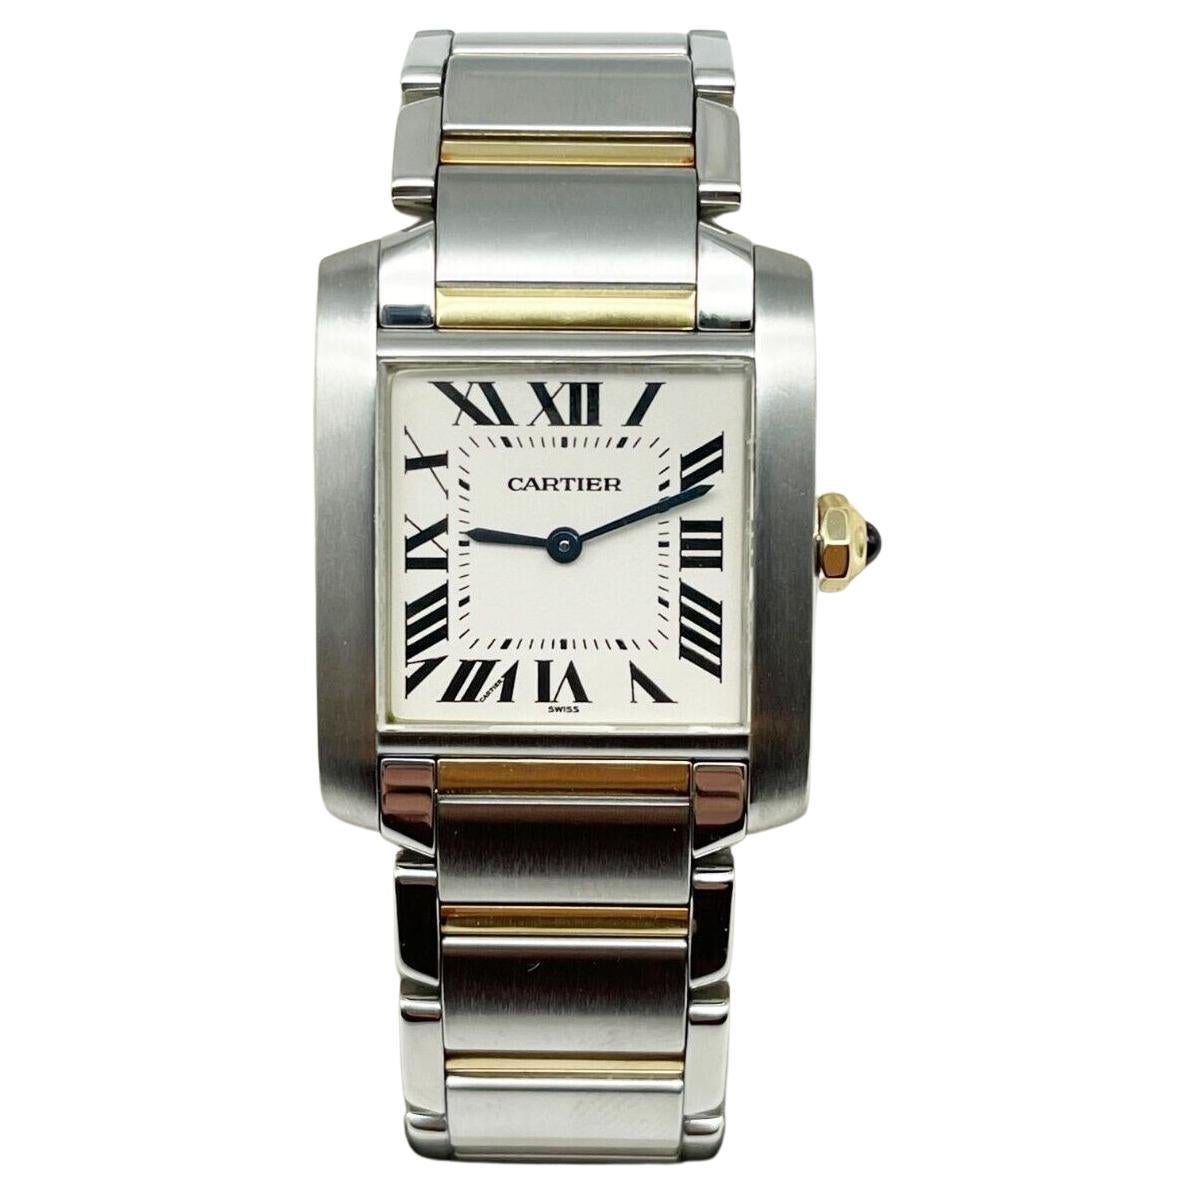 Cartier Tank Francaise Ref 2301 Midsize 18K Yellow Gold Stainless Steel at  1stDibs | cartier 2301 cc 708 177 price, cartier water resistant swiss made 2301  cc708177, cartier cc708177